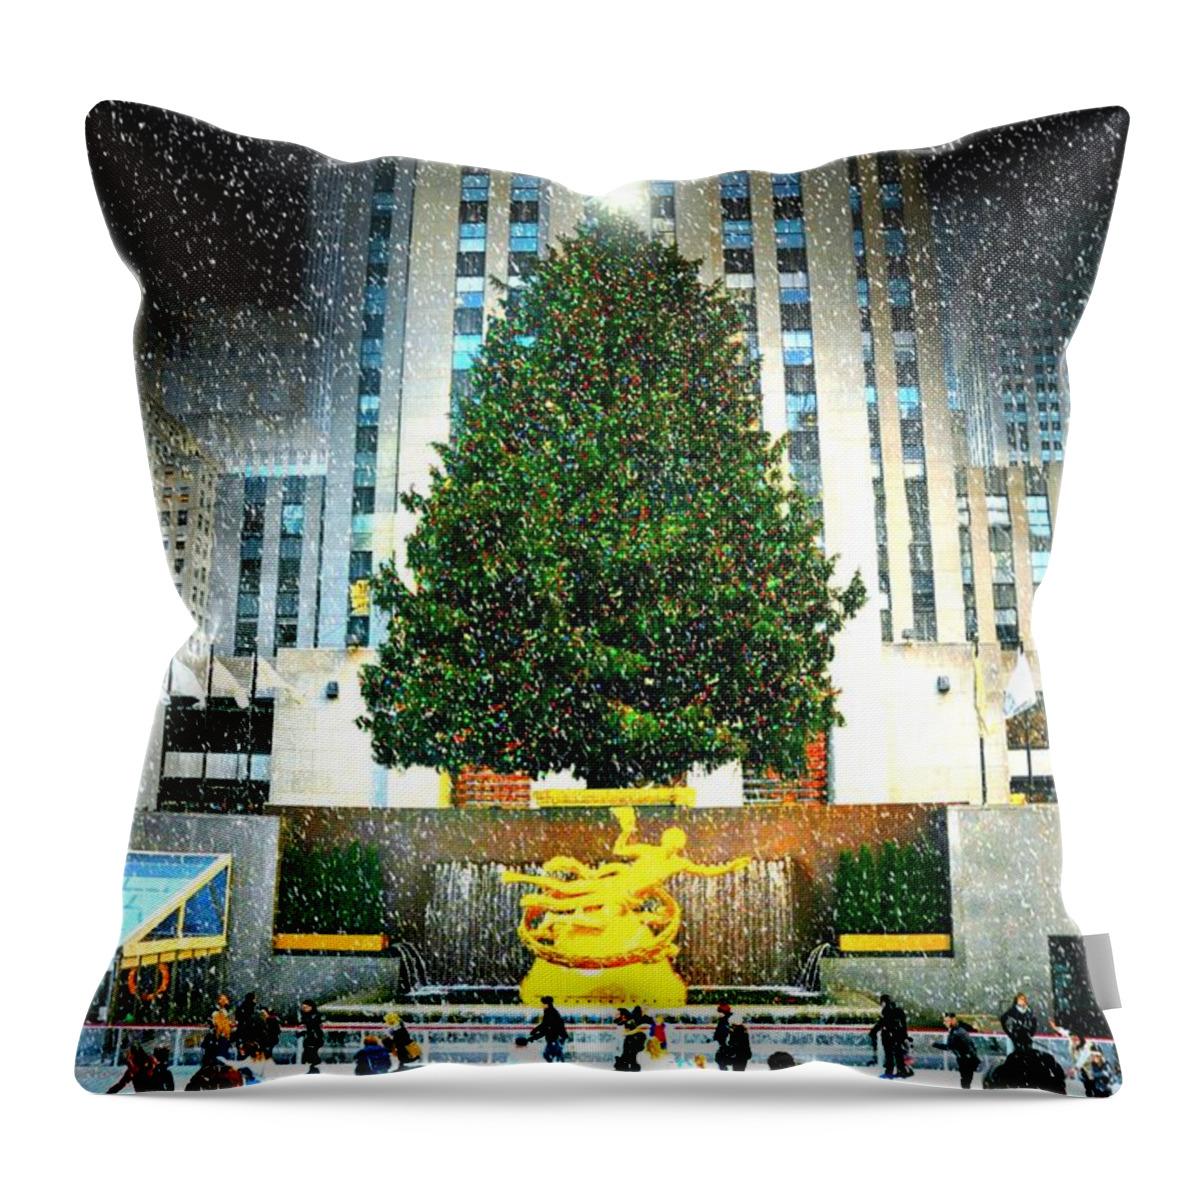 Rockefeller Center Christmas Tree 2015 Throw Pillow featuring the photograph Christmas Tree 2015 by Diana Angstadt